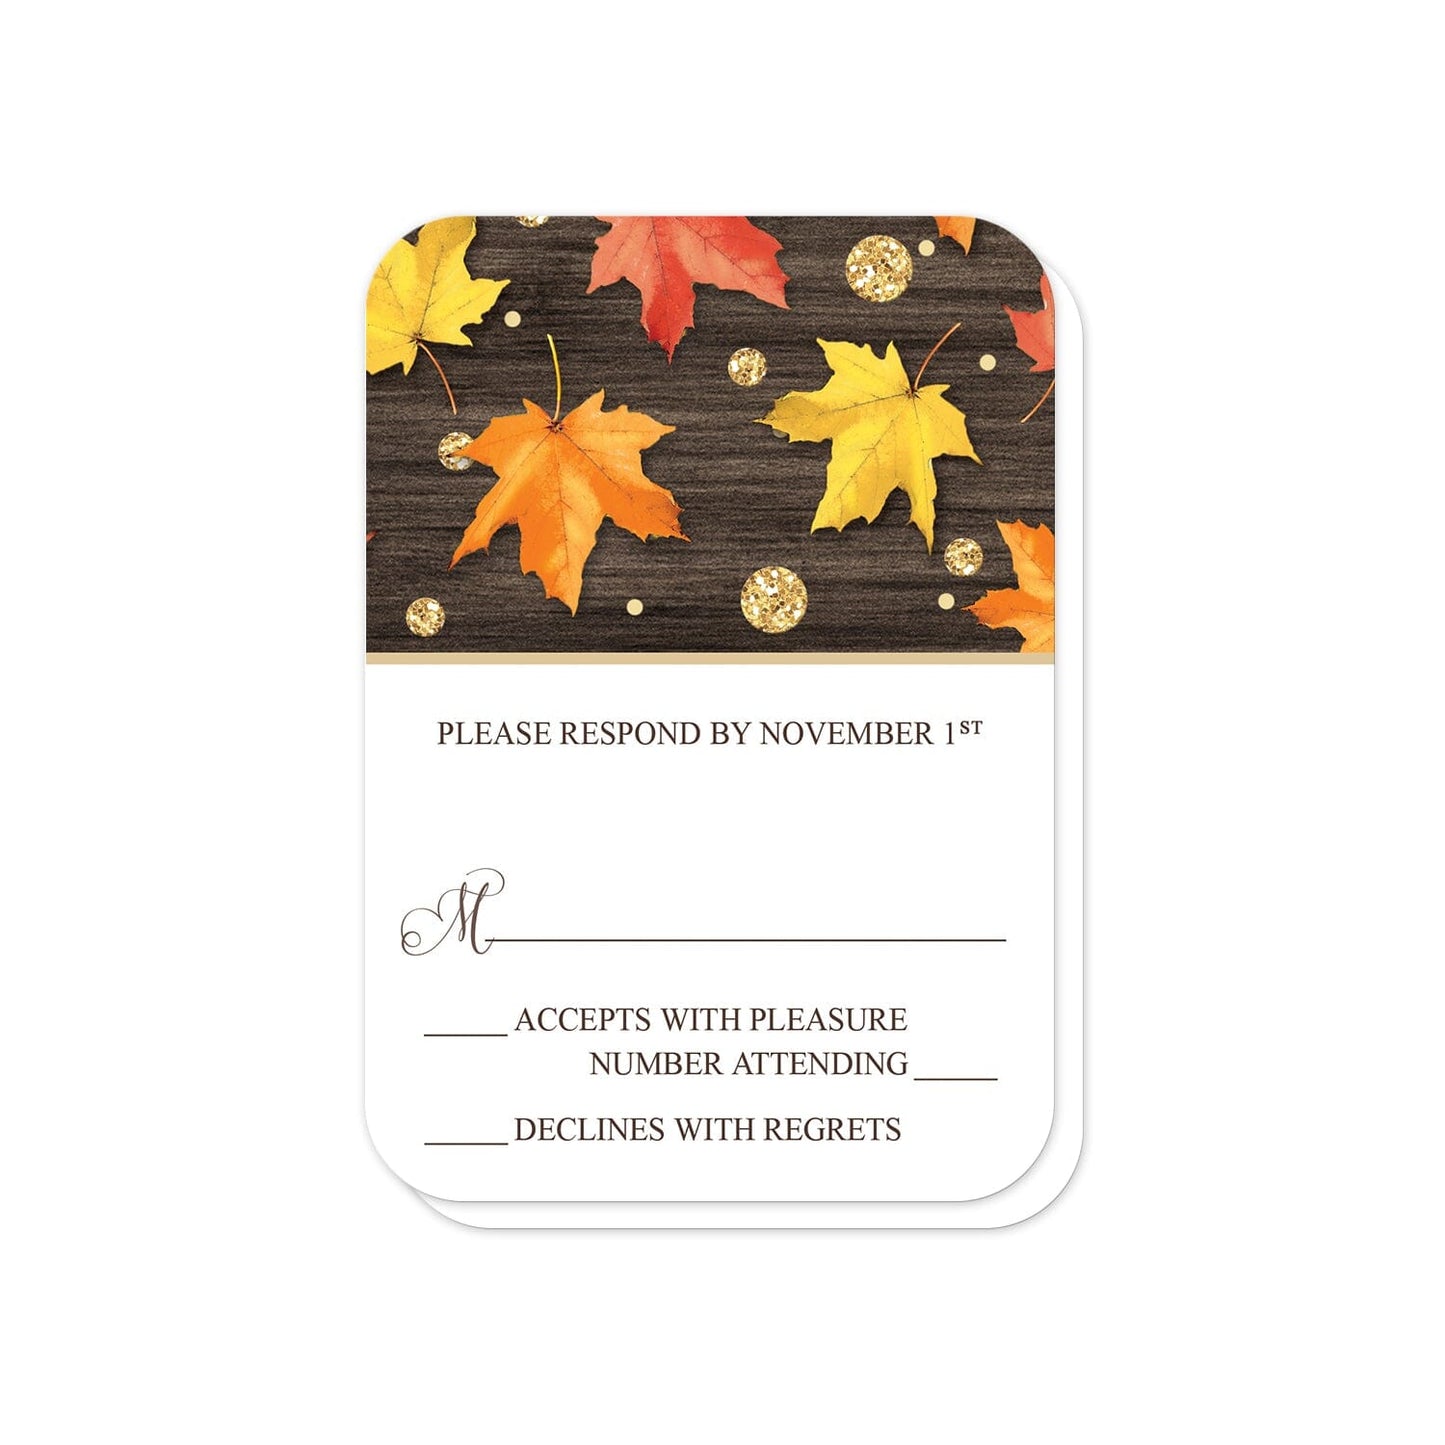 Falling Leaves with Gold Autumn RSVP Cards (with rounded corners) at Artistically Invited.